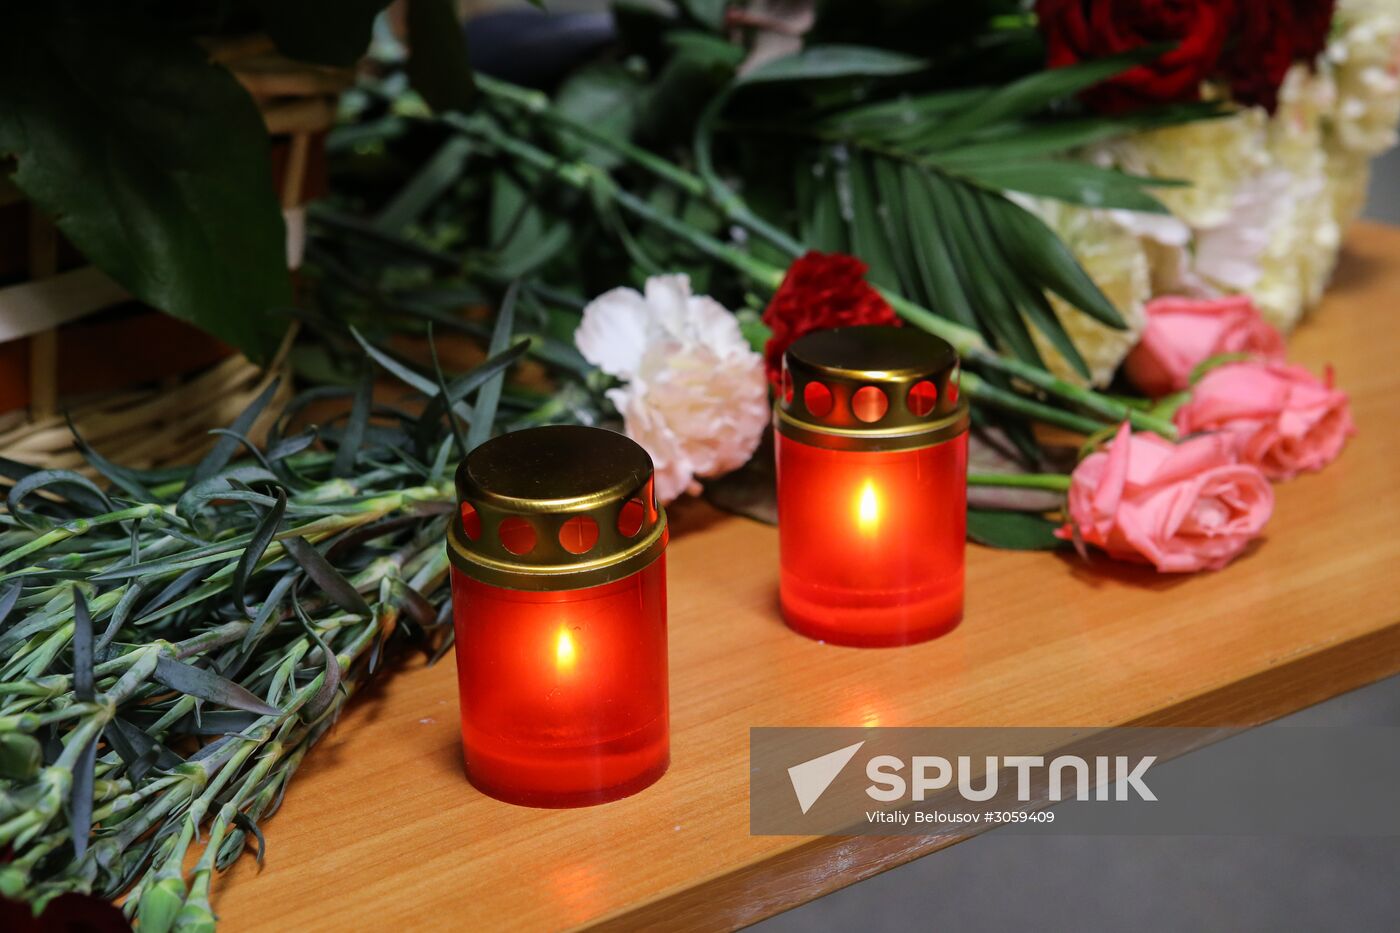 Moscow remembers victims of acts of violence at Park Kultura and Lubyanka stations